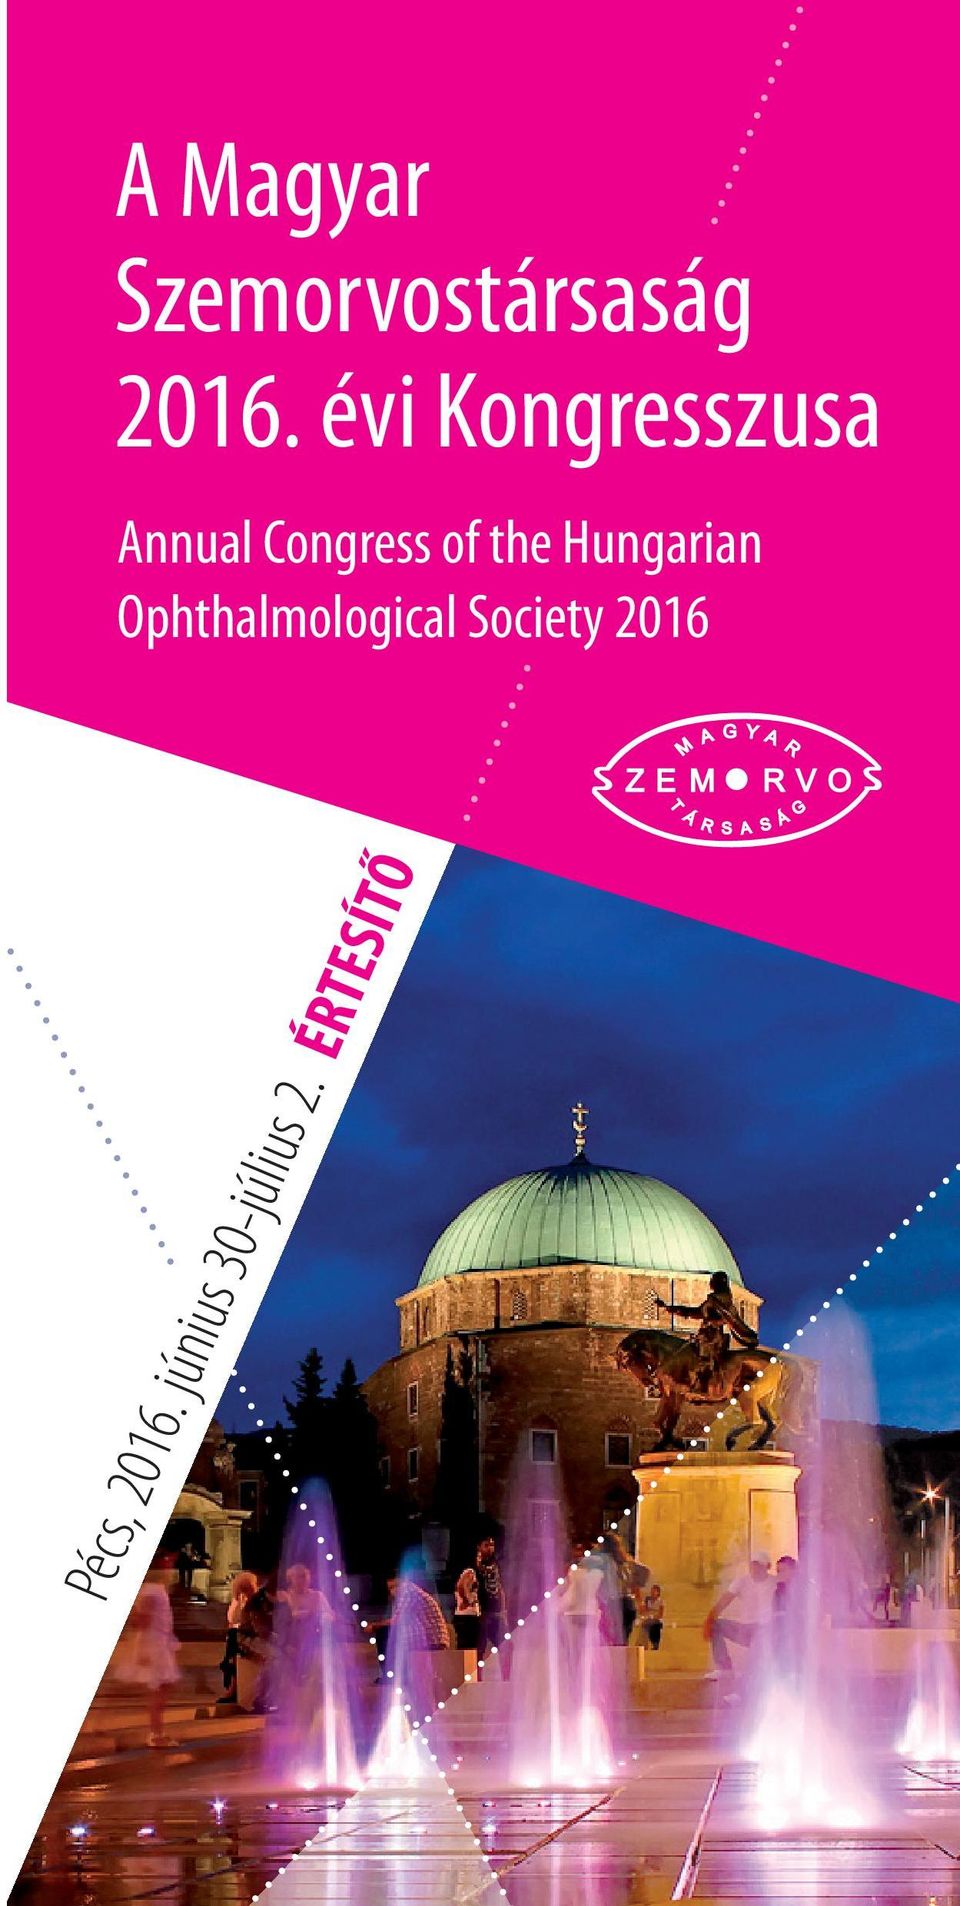 the Hungarian Ophthalmological Society